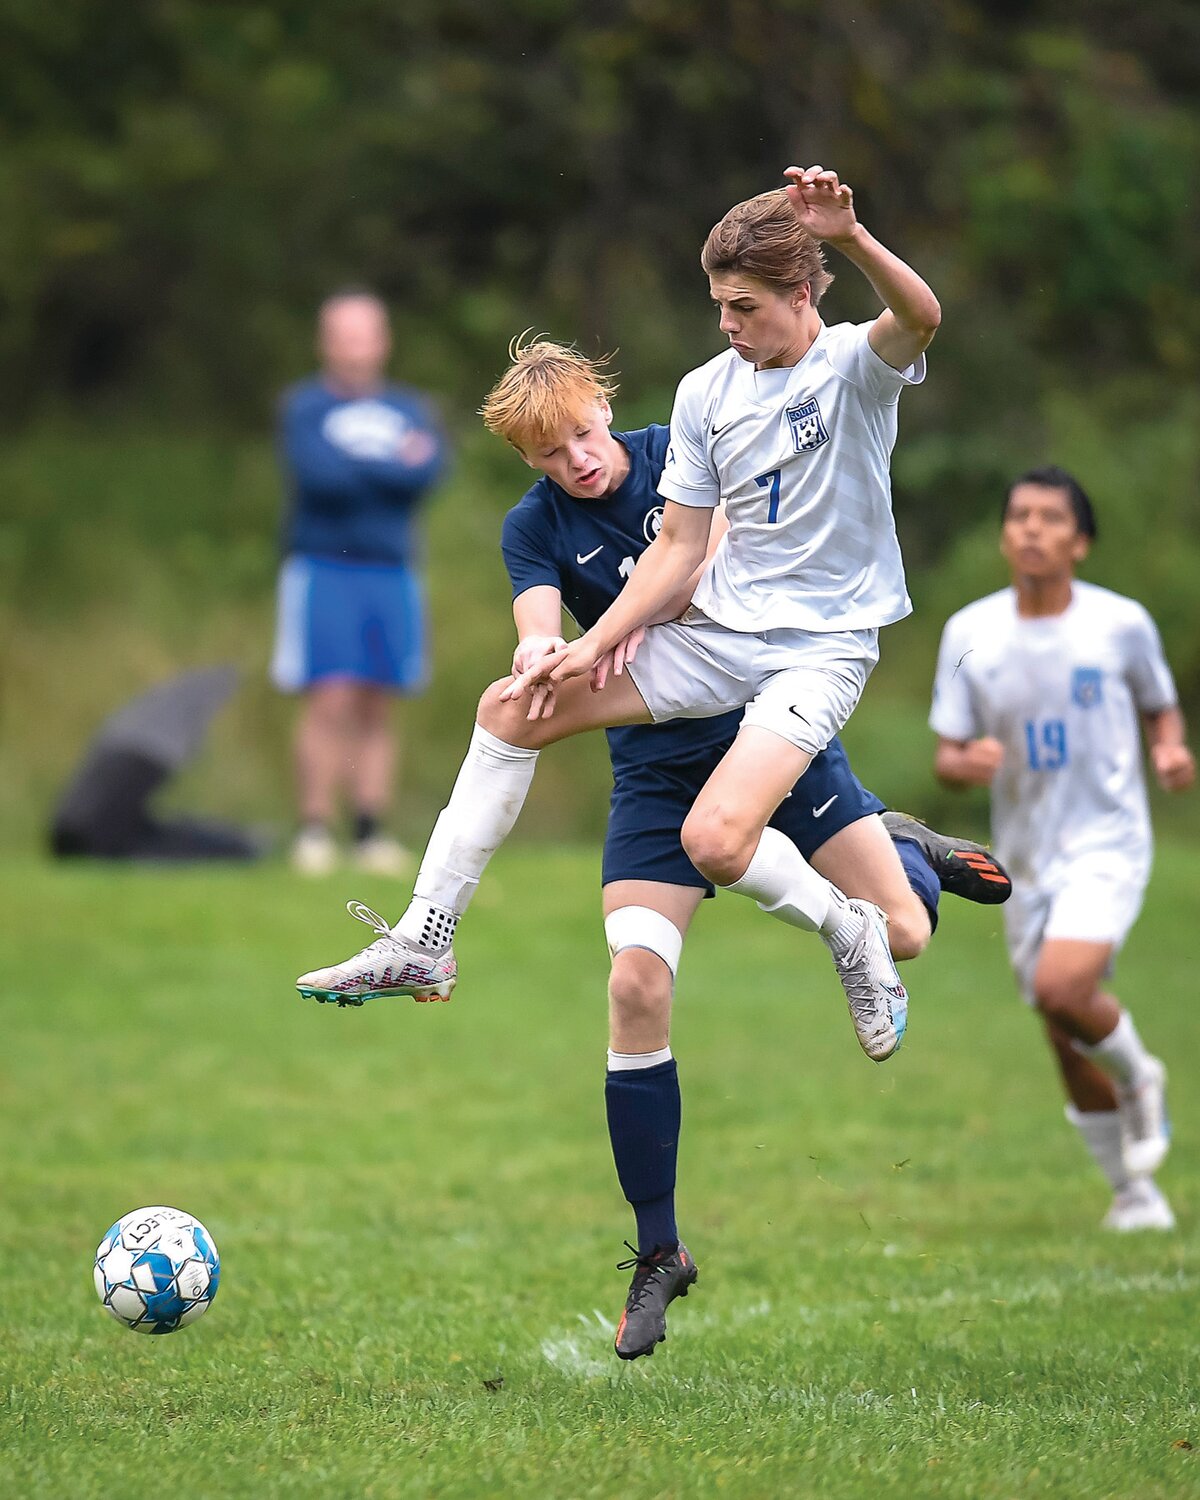 South Hunterdon’s Ollie Horan collides with Solebury School’s Emmitt Caruso while chasing a midfield pass.